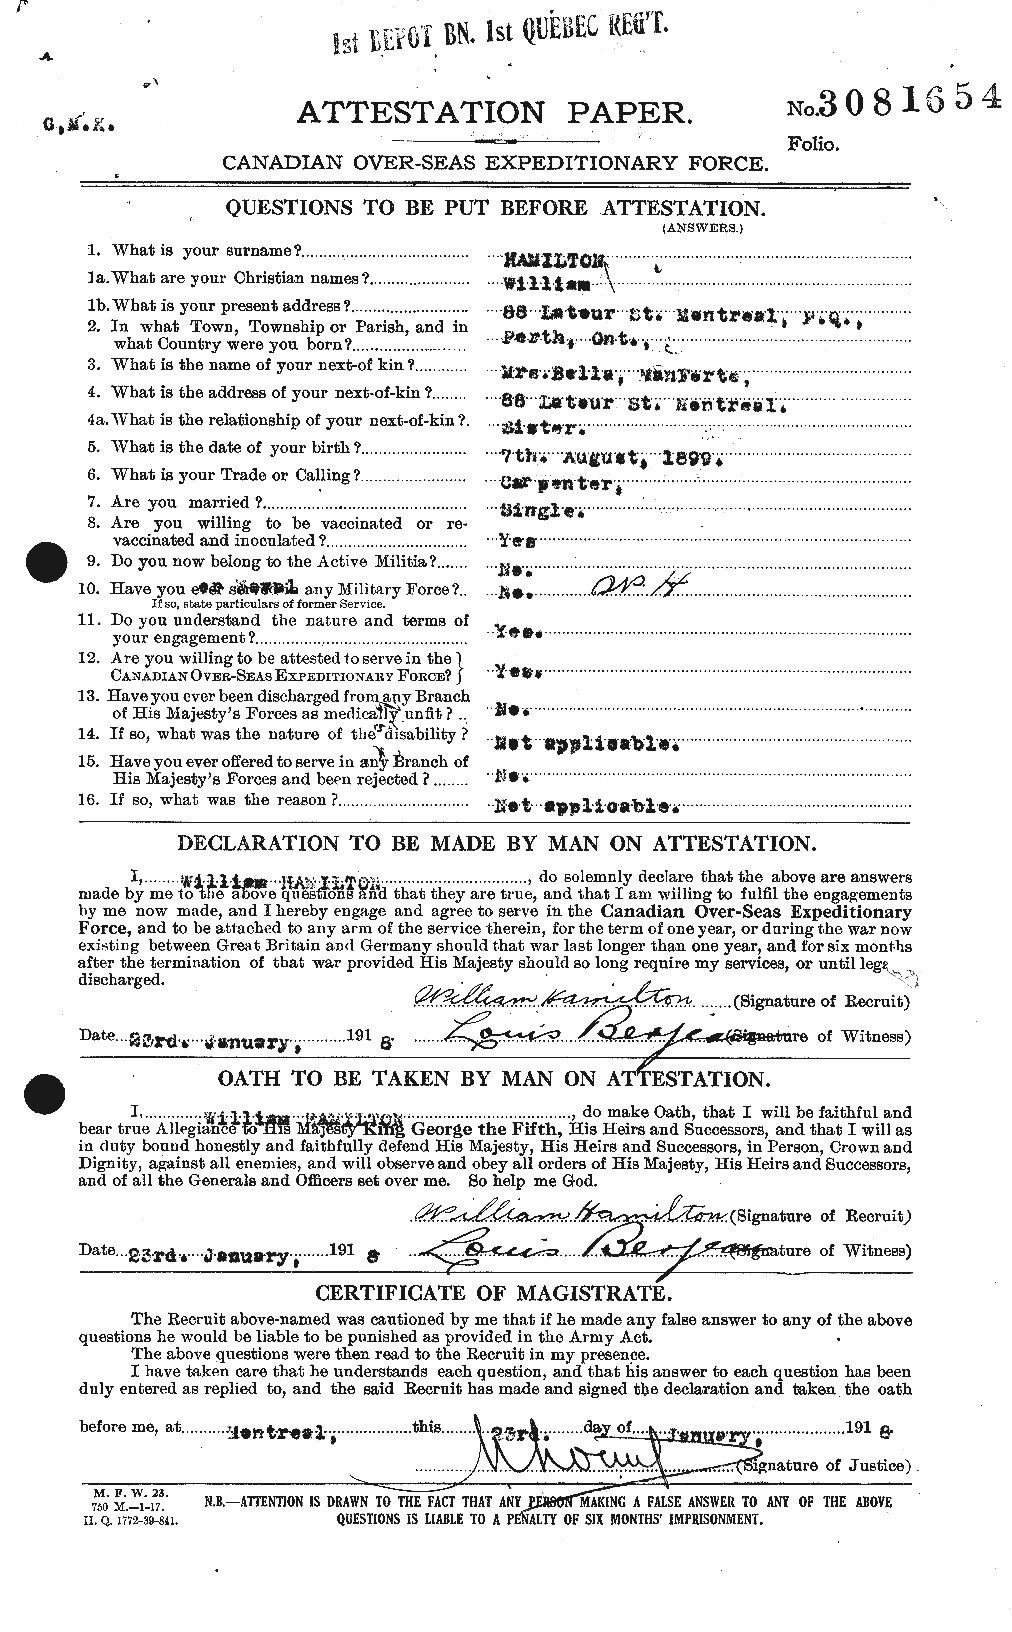 Personnel Records of the First World War - CEF 374841a